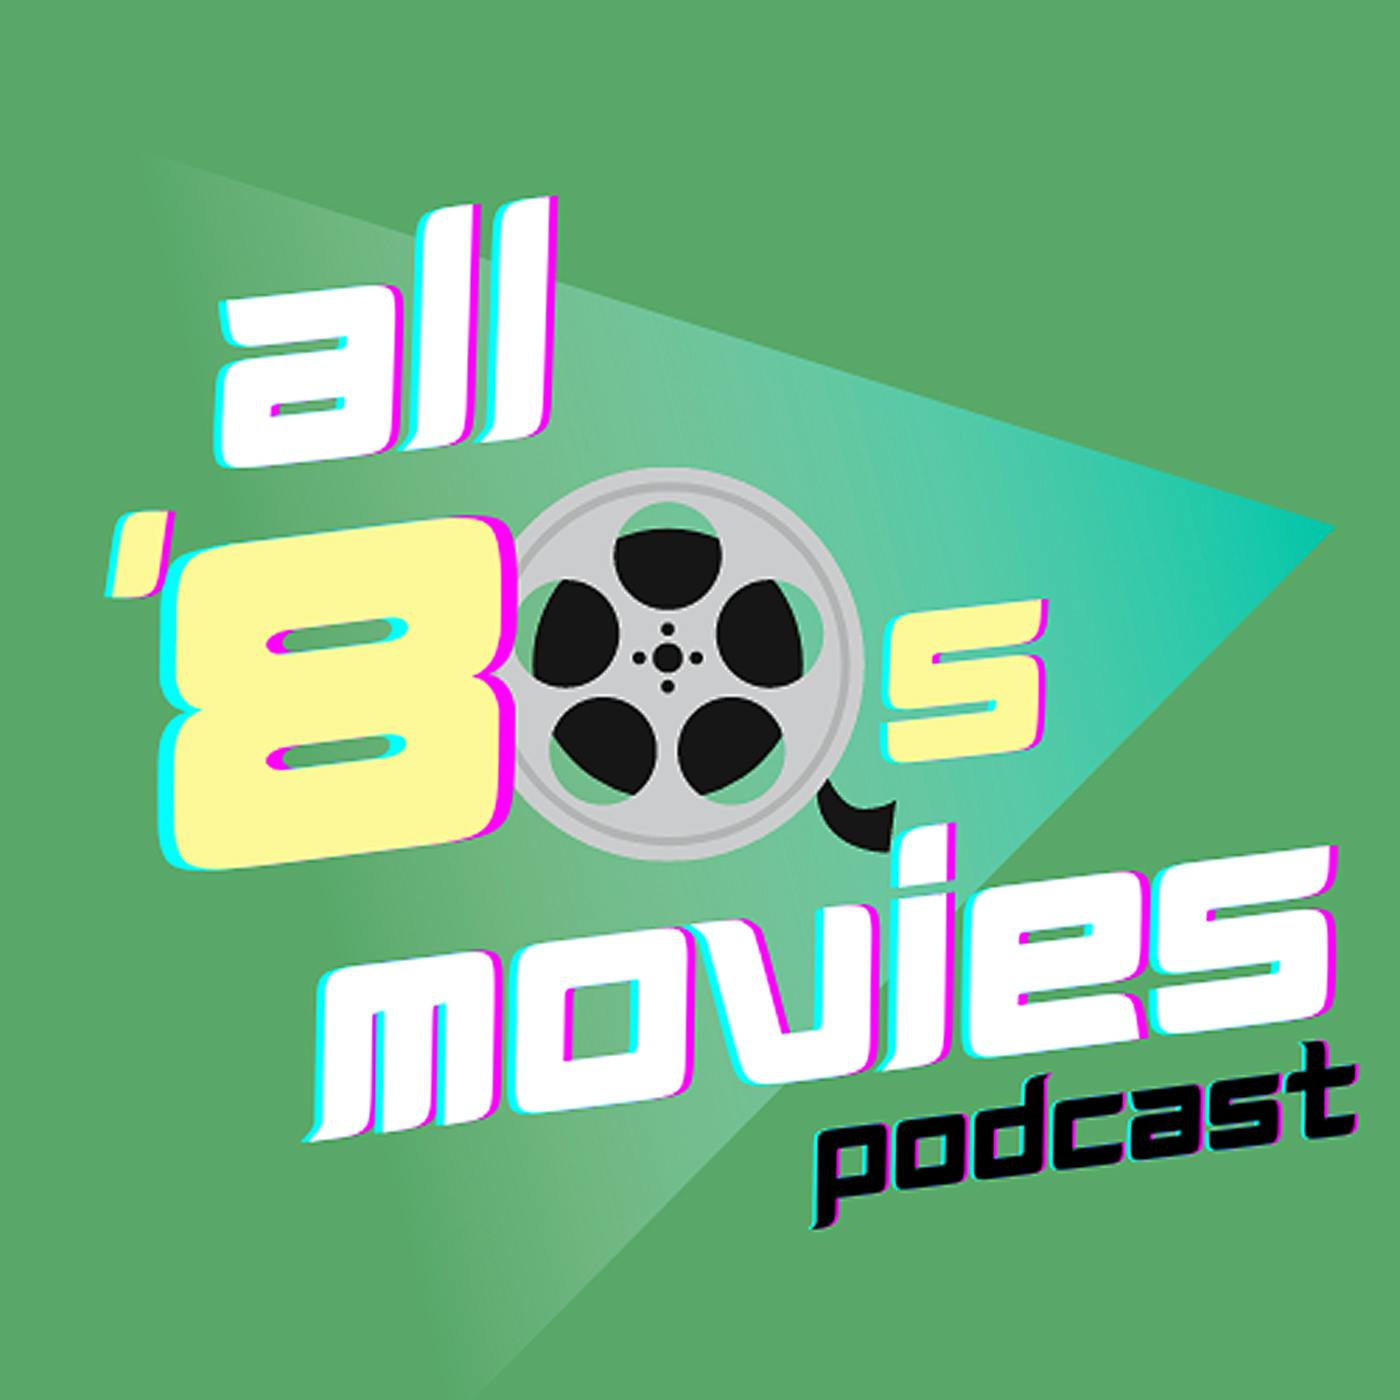 All '80s Movies Podcast podcast